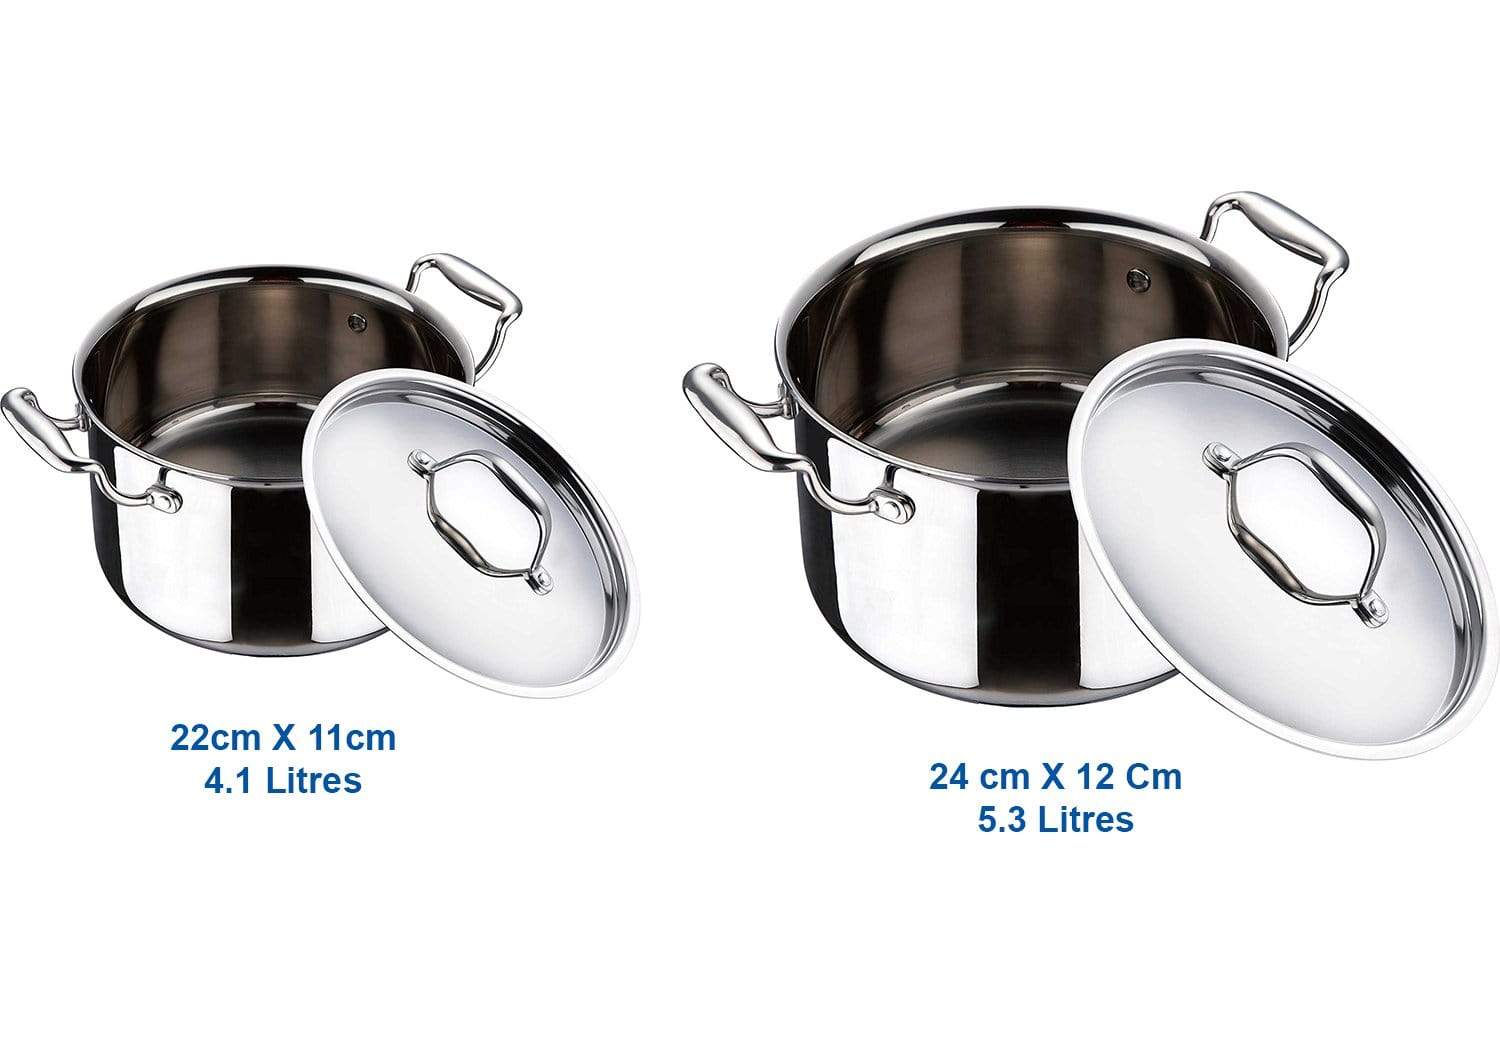 Bergner Argent Triply Stainless Steel Casserole with Lid (Combo Packs) - KITCHEN MART